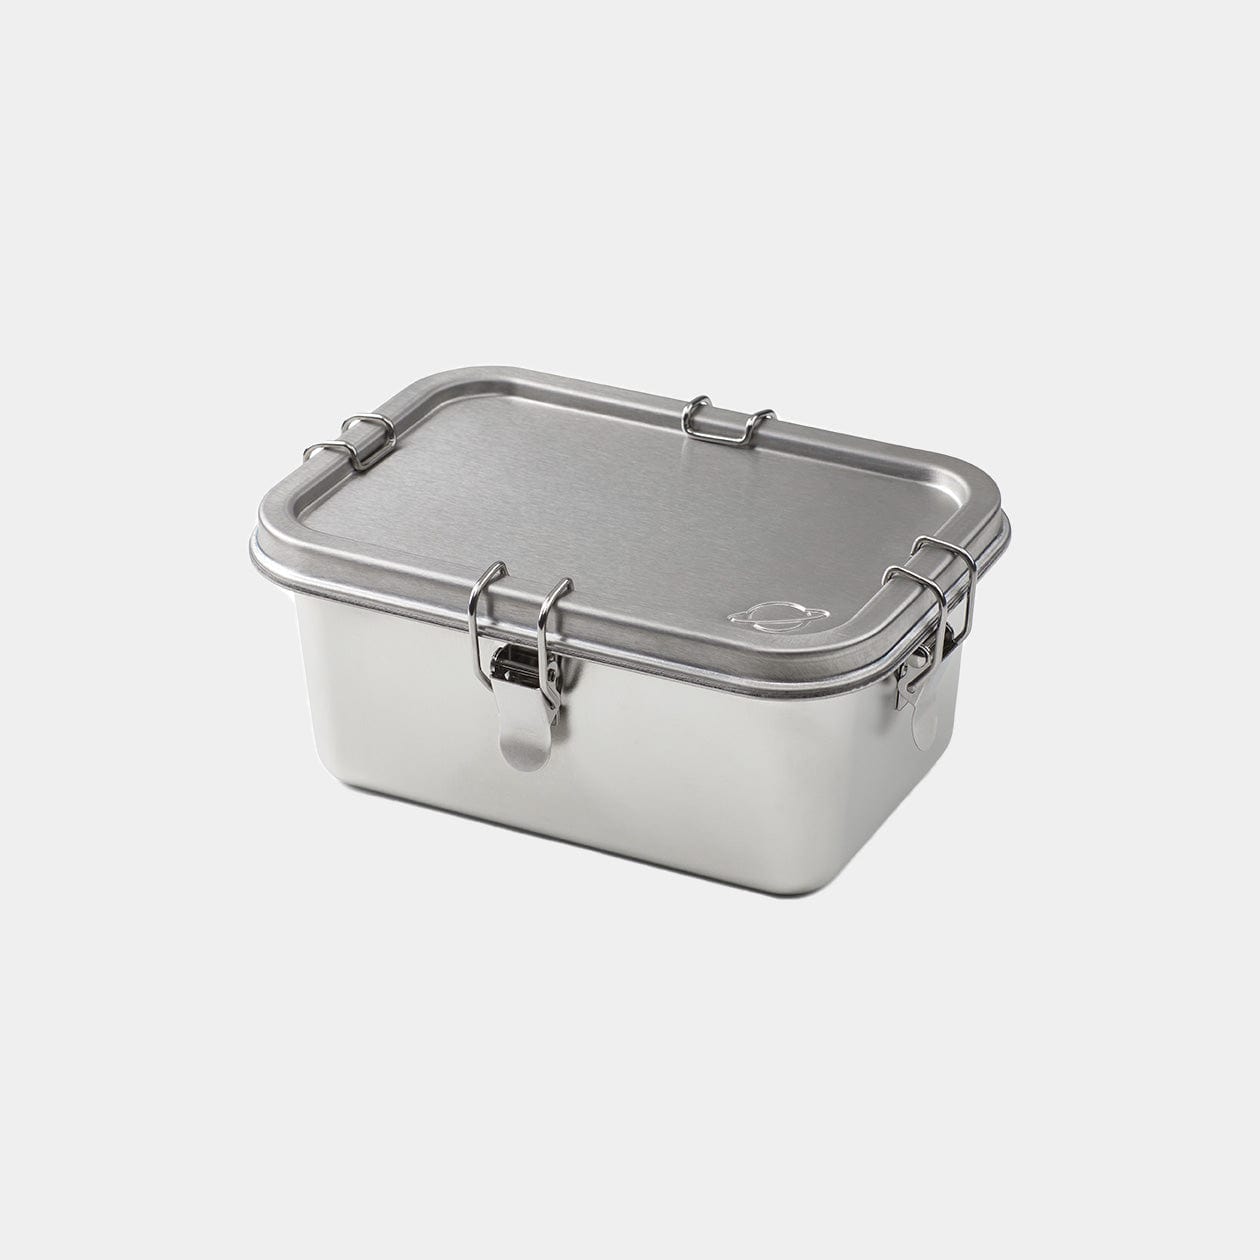 Earth Day Pick: Planetbox lunch boxes get even cooler - Cool Mom Picks